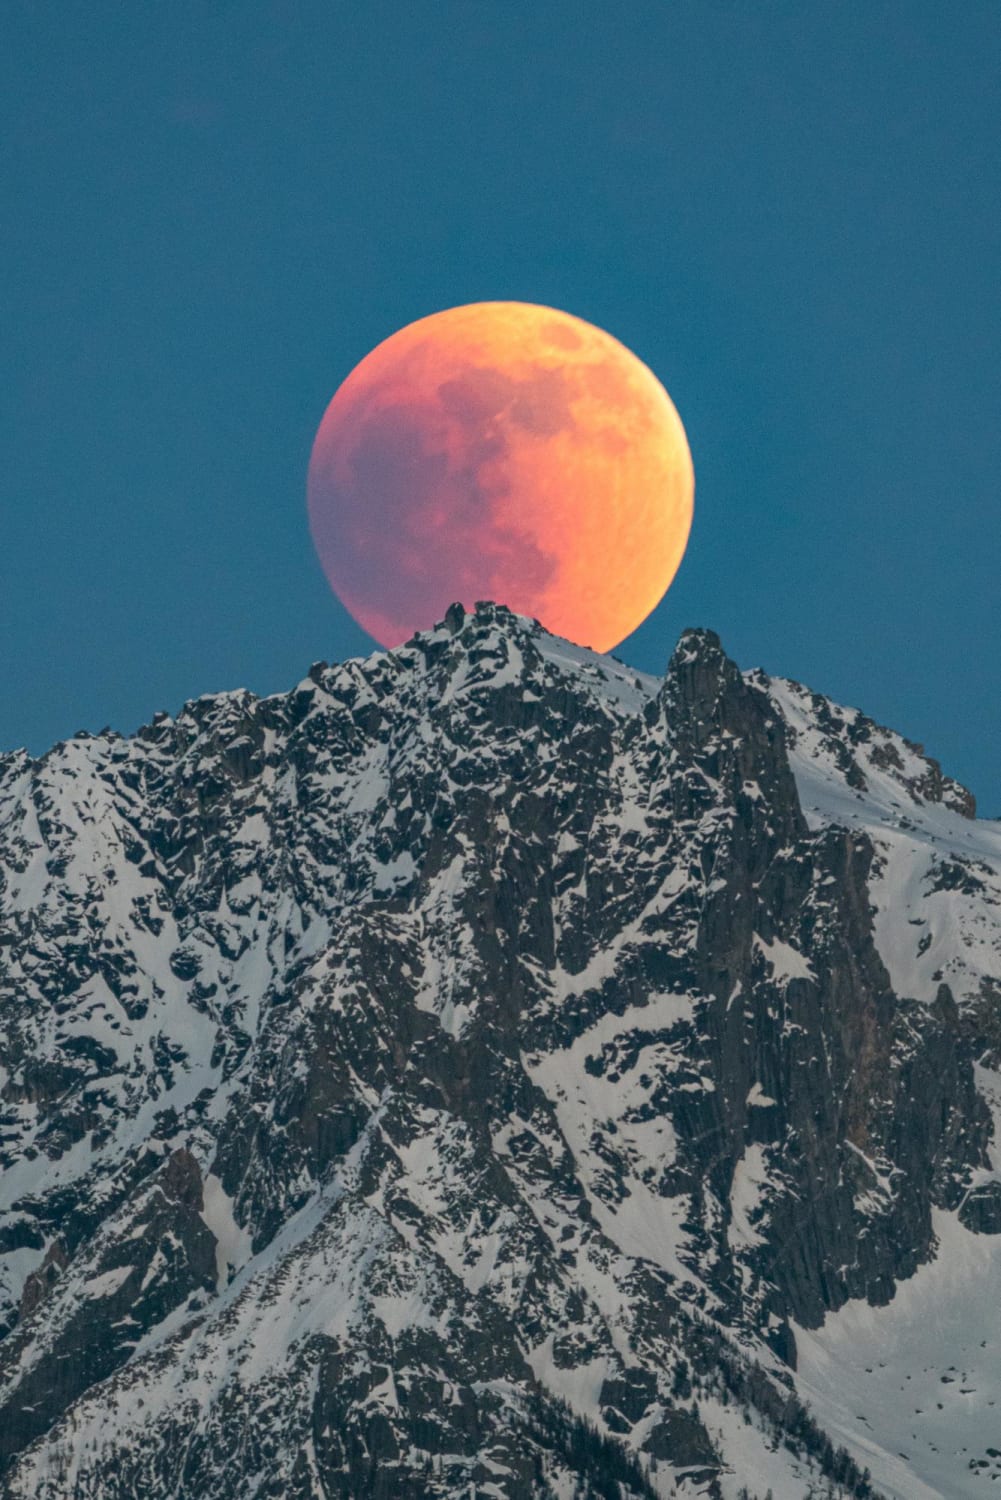 2022 Lunar Eclipse rises above the Absaroka Range in Montana - 600mm f/8 2” ISO1600